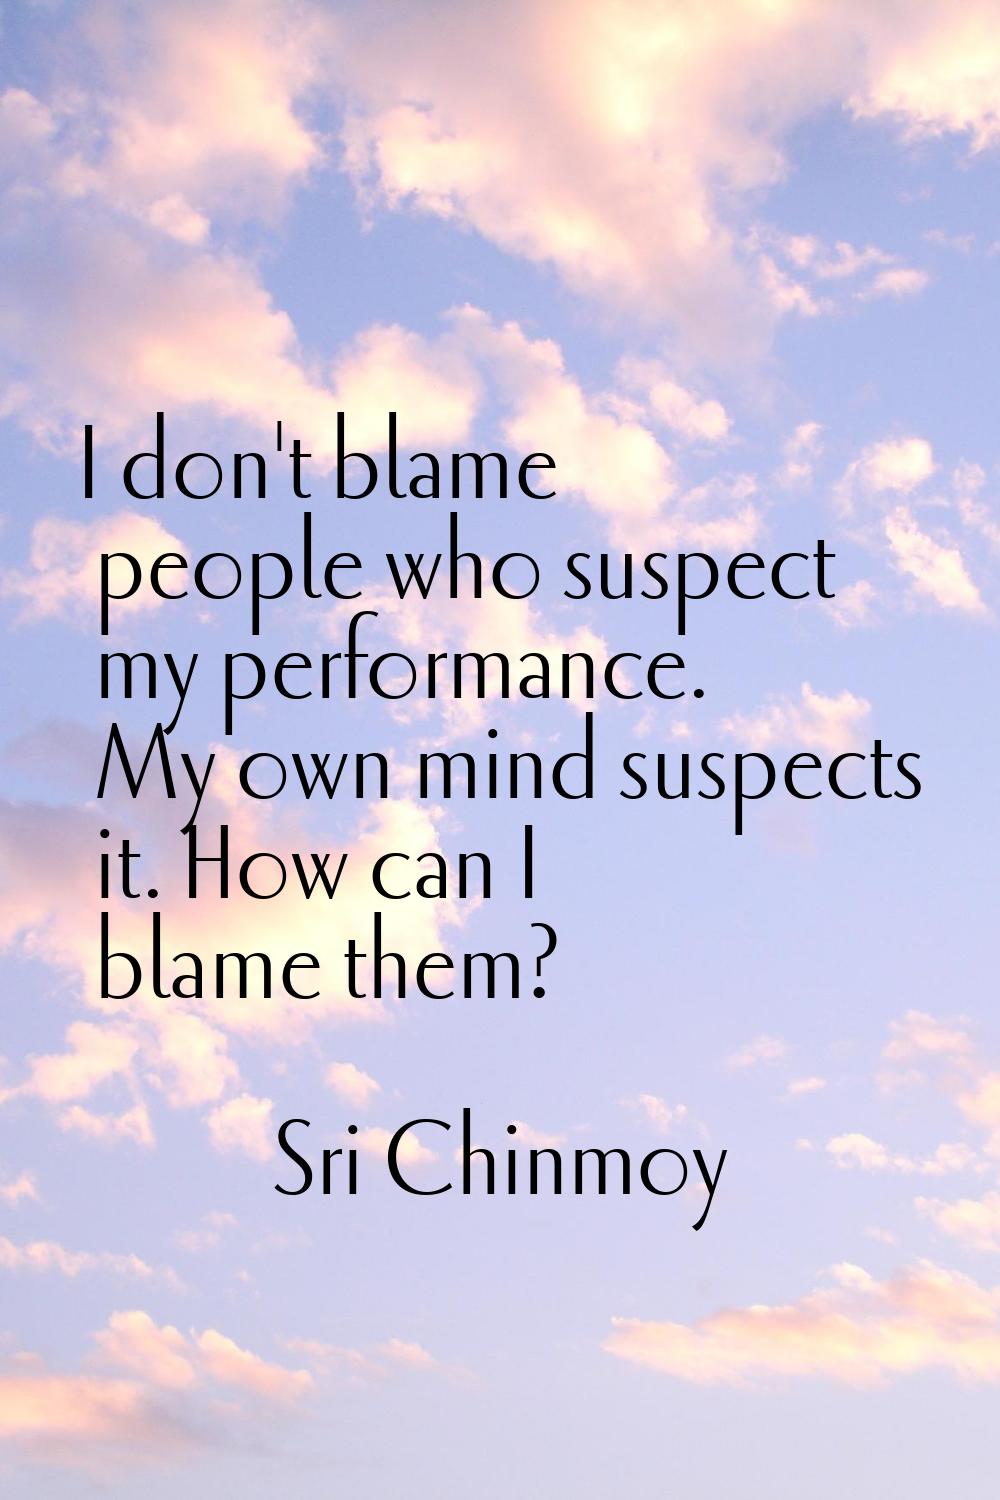 I don't blame people who suspect my performance. My own mind suspects it. How can I blame them?